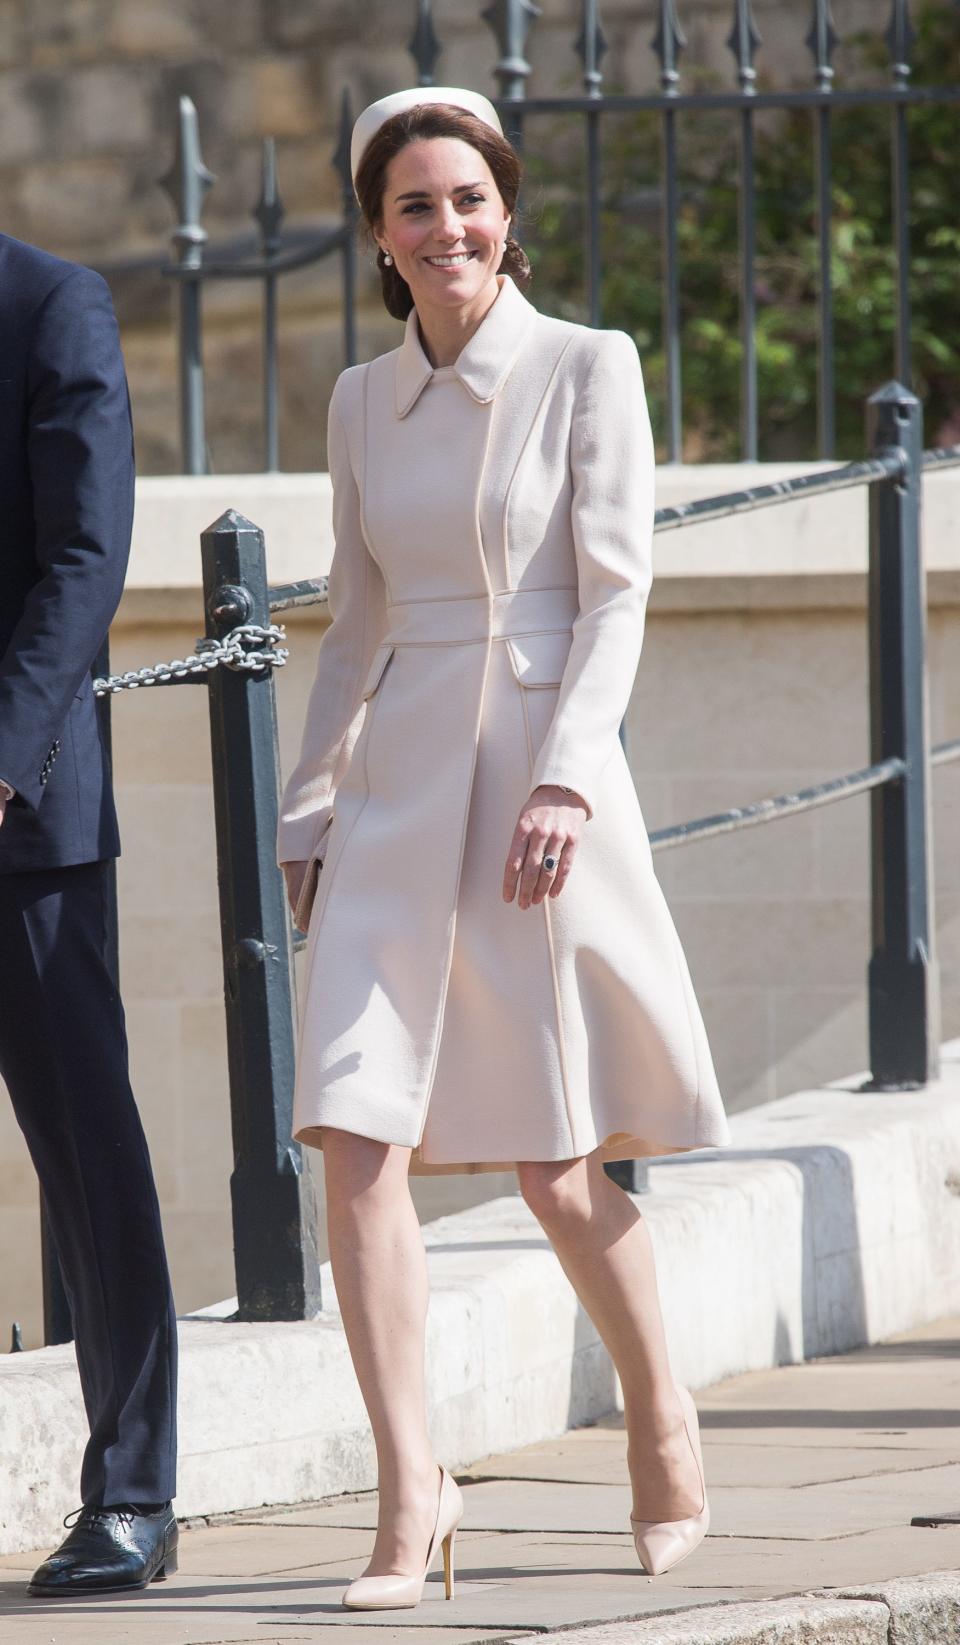 Kate Middleton attends Easter Day Service at St George's Chapel on April 16, 2017